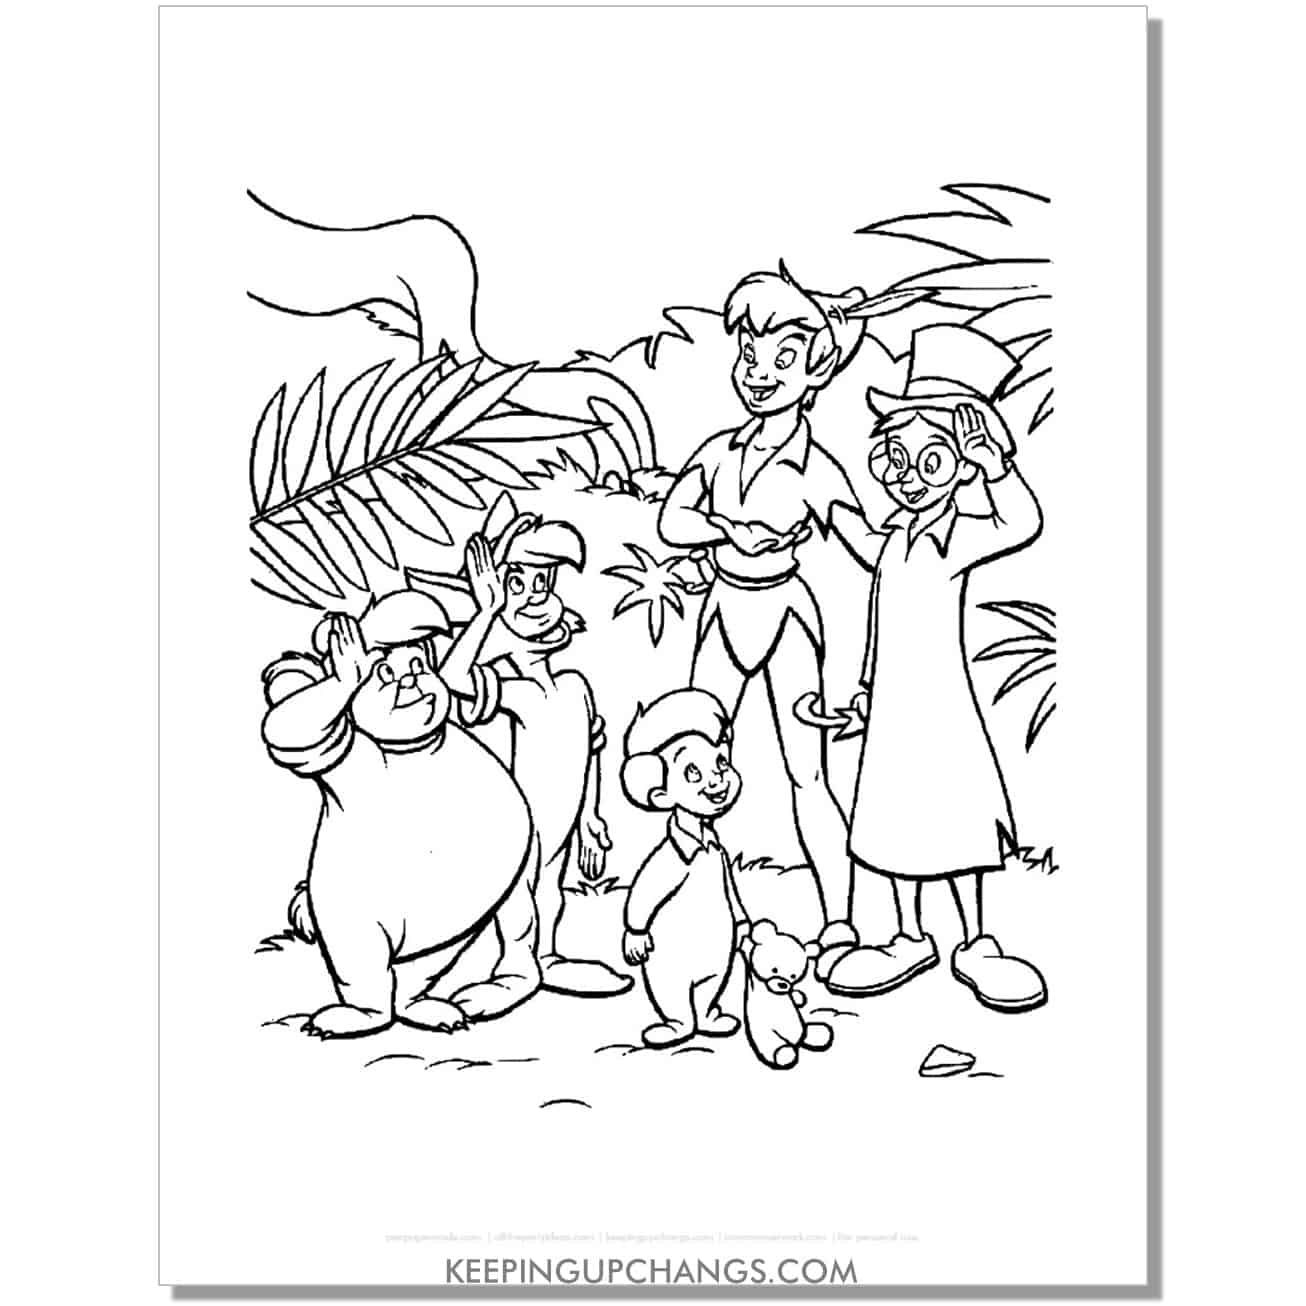 lost boys and john darling salute to peter pan coloring page, sheet.